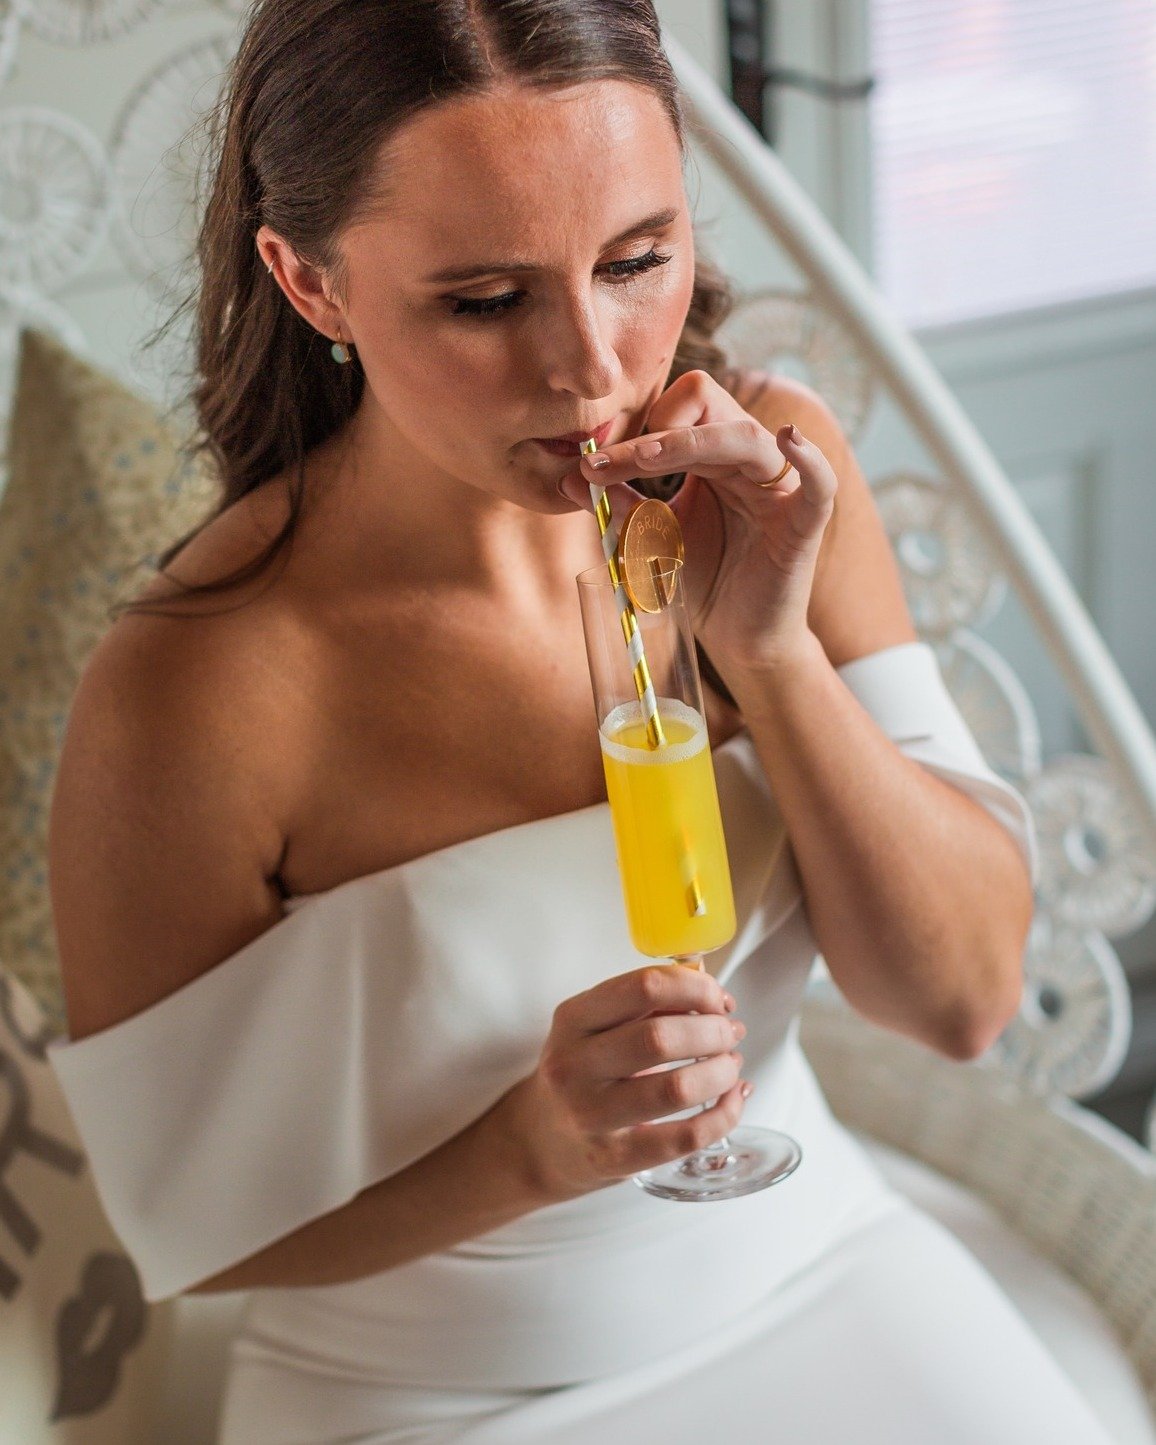 &iexcl;Salud! 🍹 Let's raise a toast to Cinco de Mayo with a twist&mdash;mimosas with a splash of fiesta flair! Whether you're sipping on traditional margaritas or adding a little bubbly to your celebration, may your day be filled with sunshine, laug